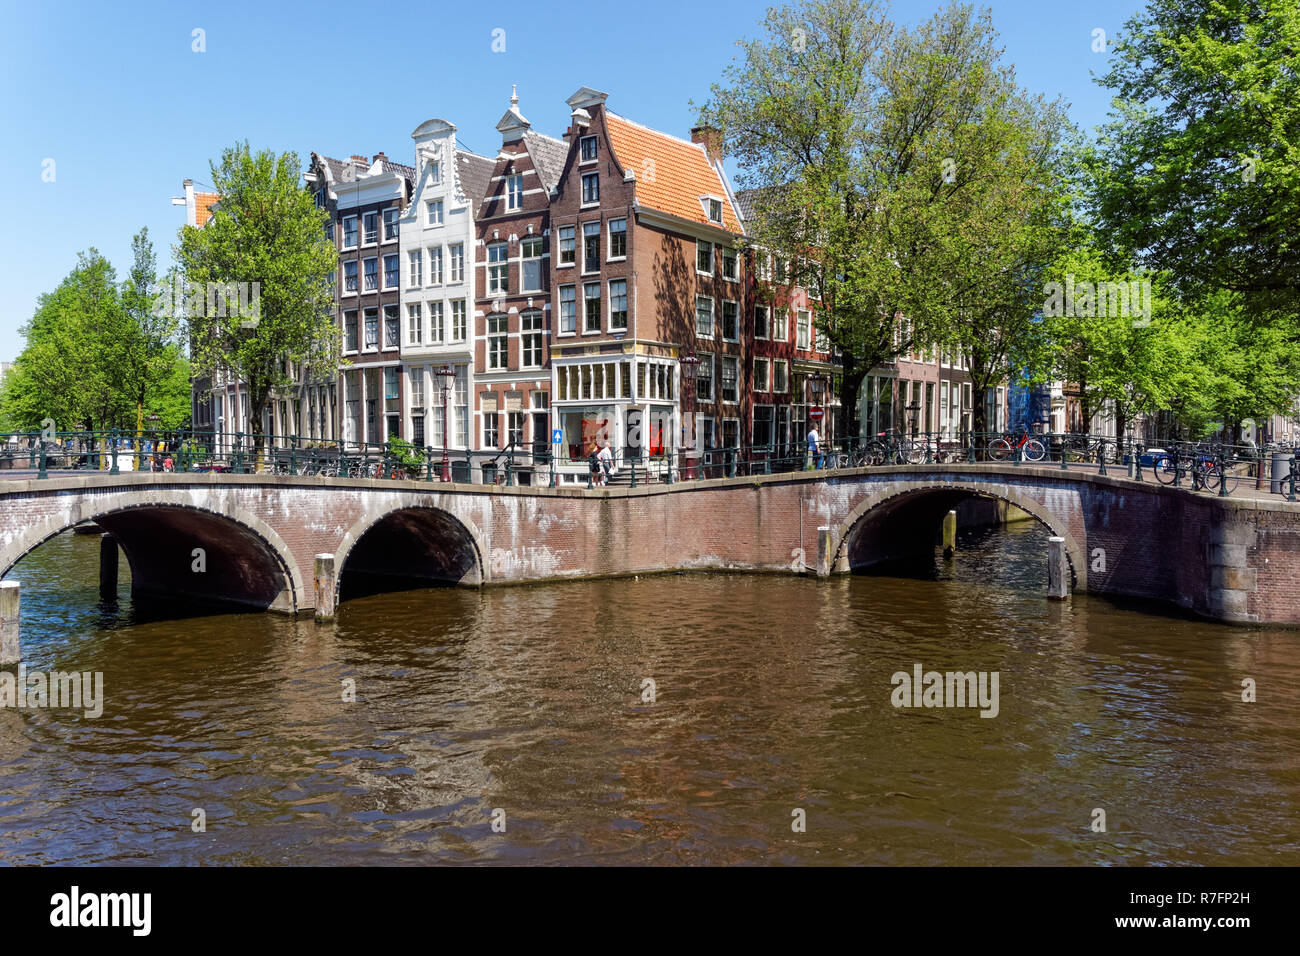 Traditional Dutch townhouses at Keizersgracht canal in Amsterdam, Netherlands Stock Photo